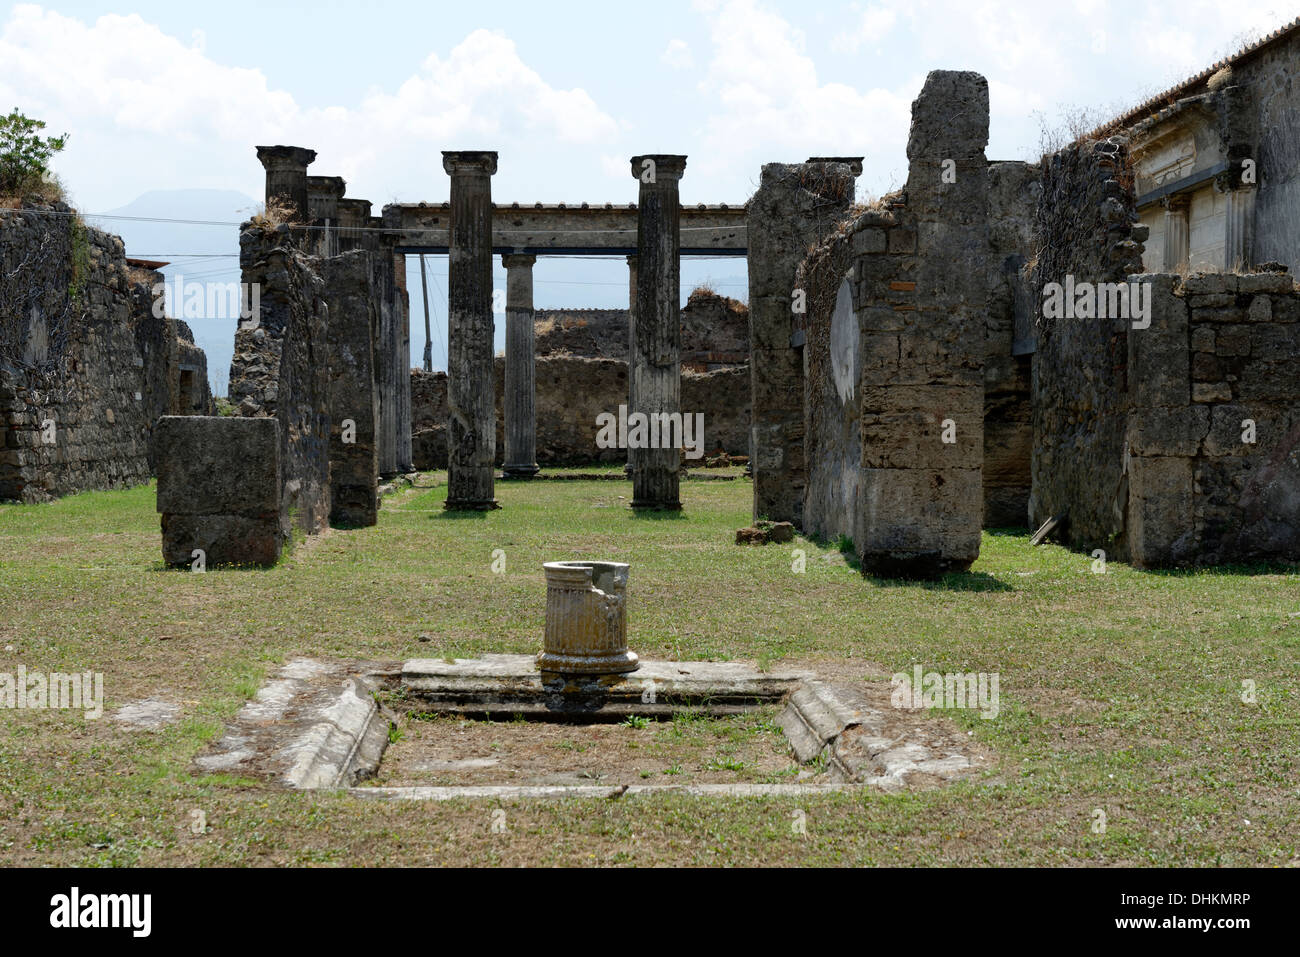 View across the atrium with Impluvium to the tablinum and Peristyle of the House of the Figured Capitals, Pompeii Italy. Stock Photo